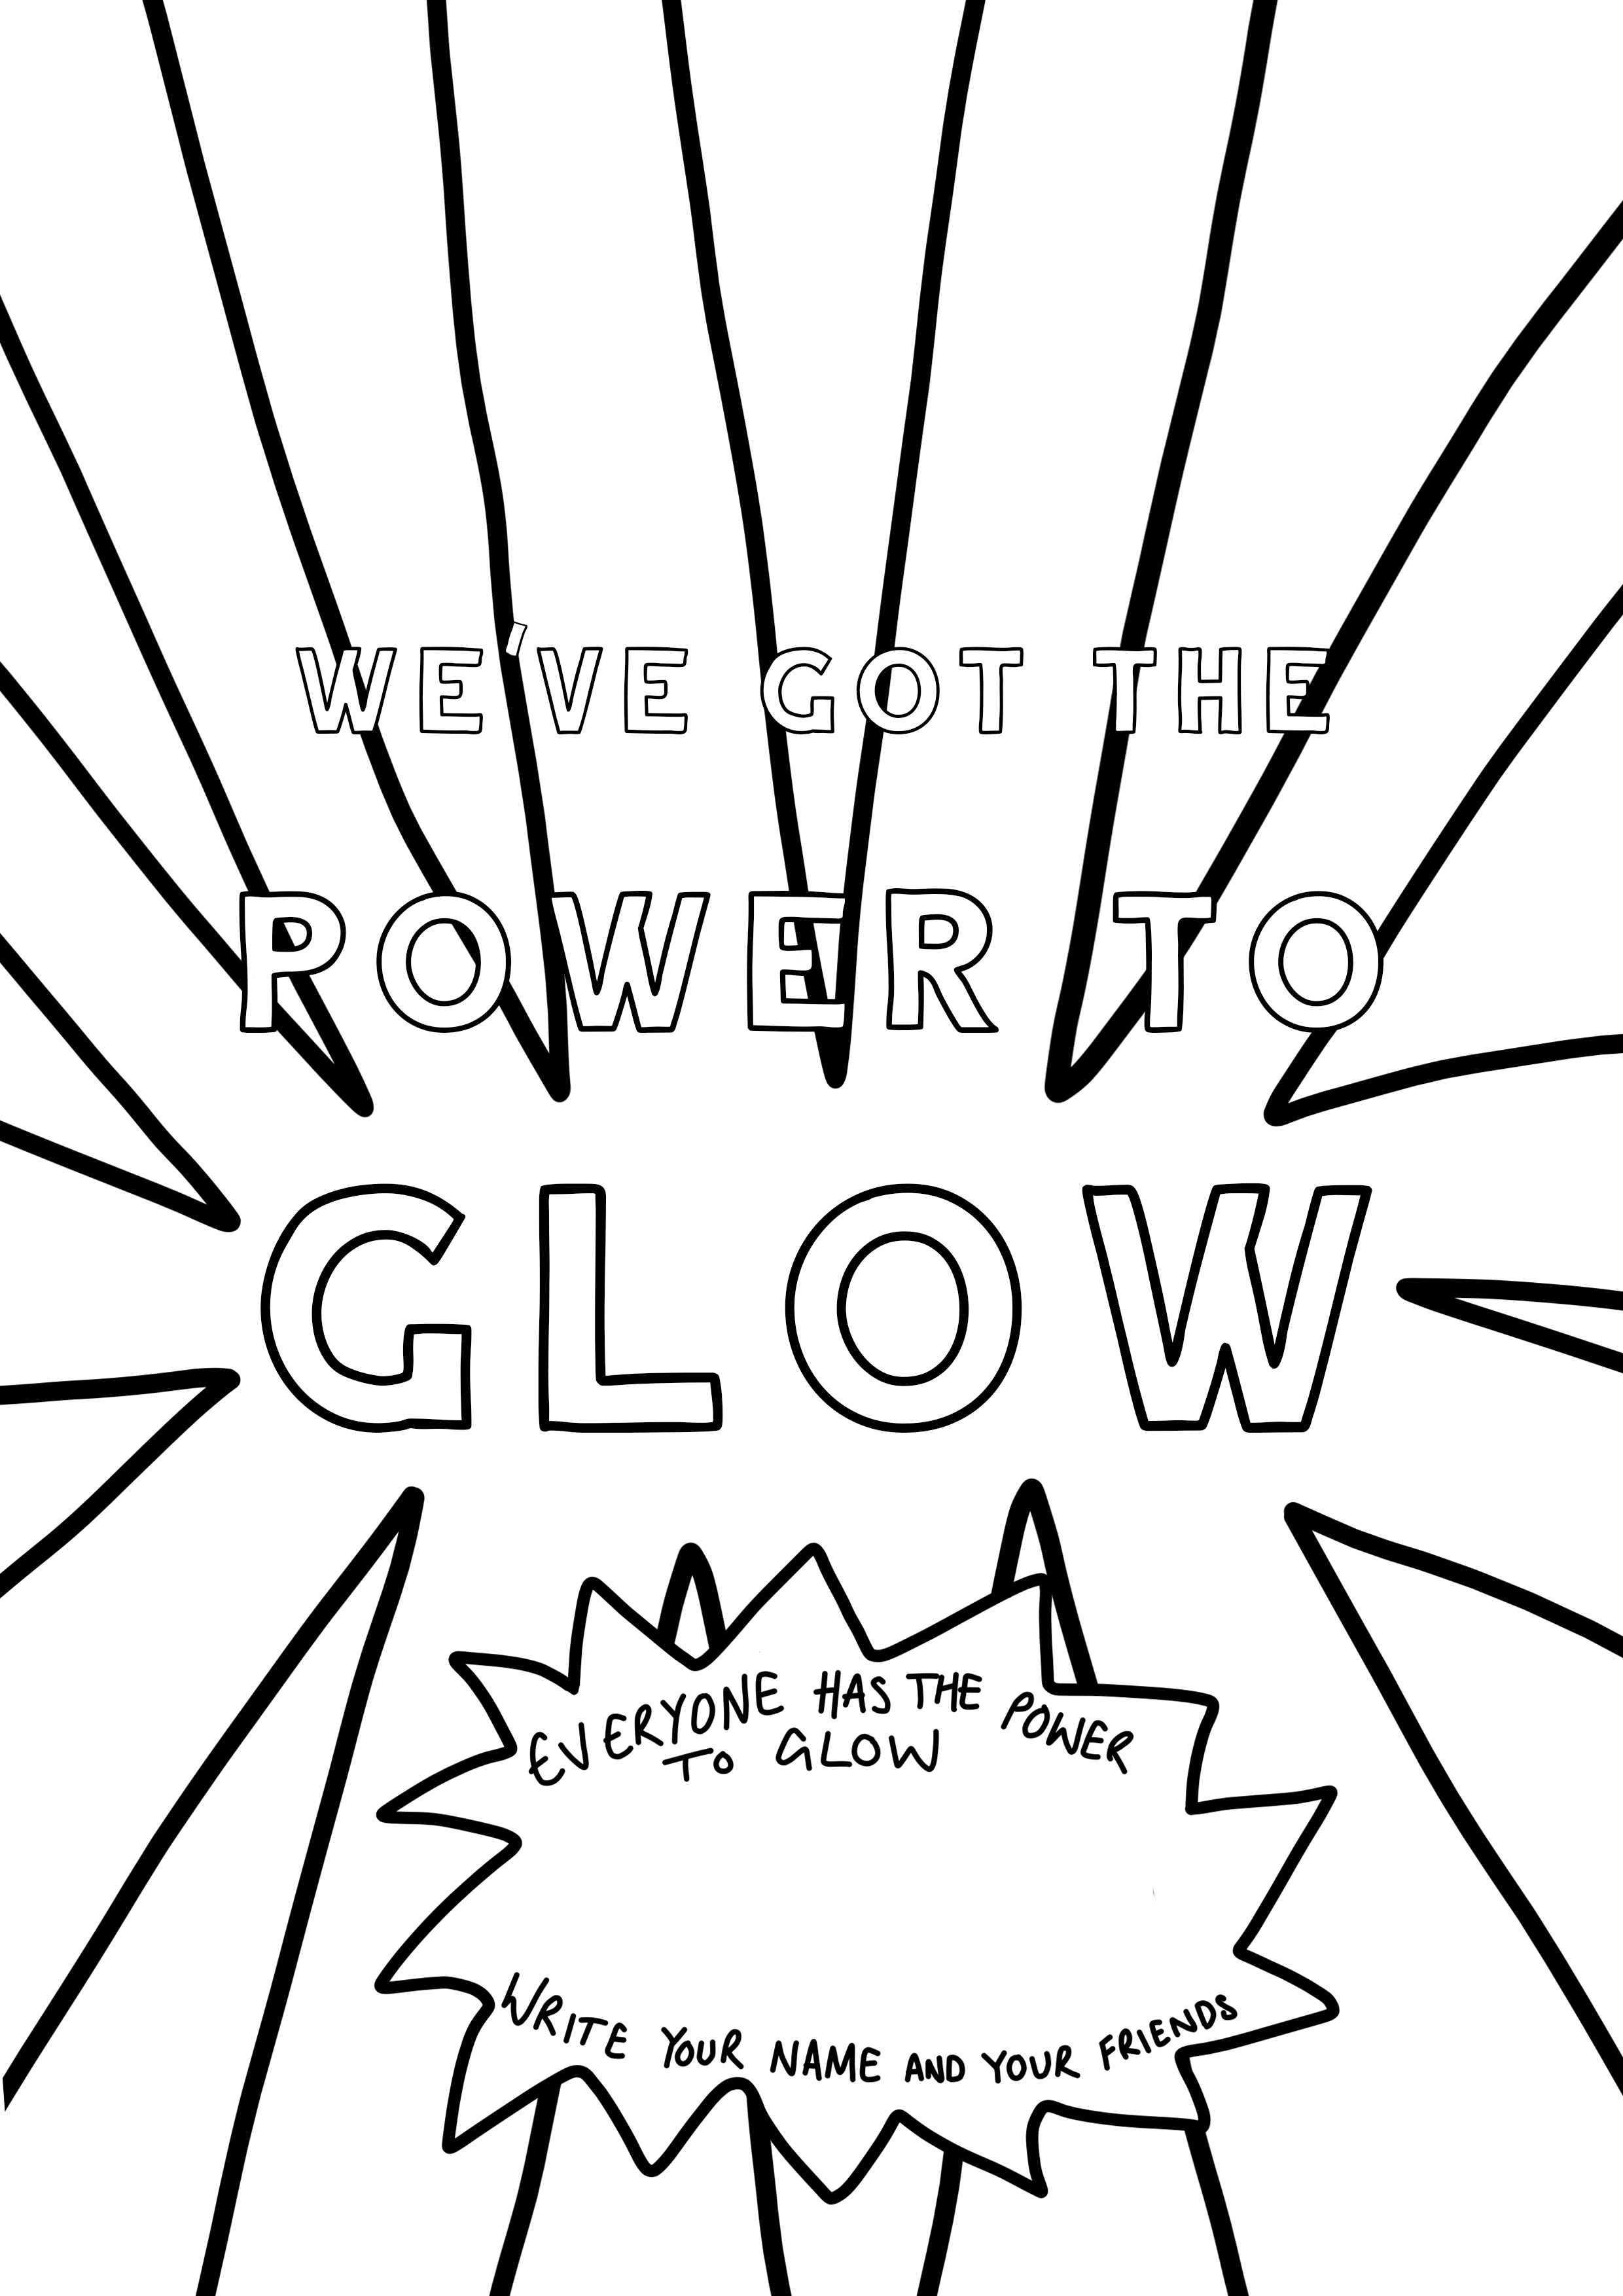 Power to Glow colouring sheet